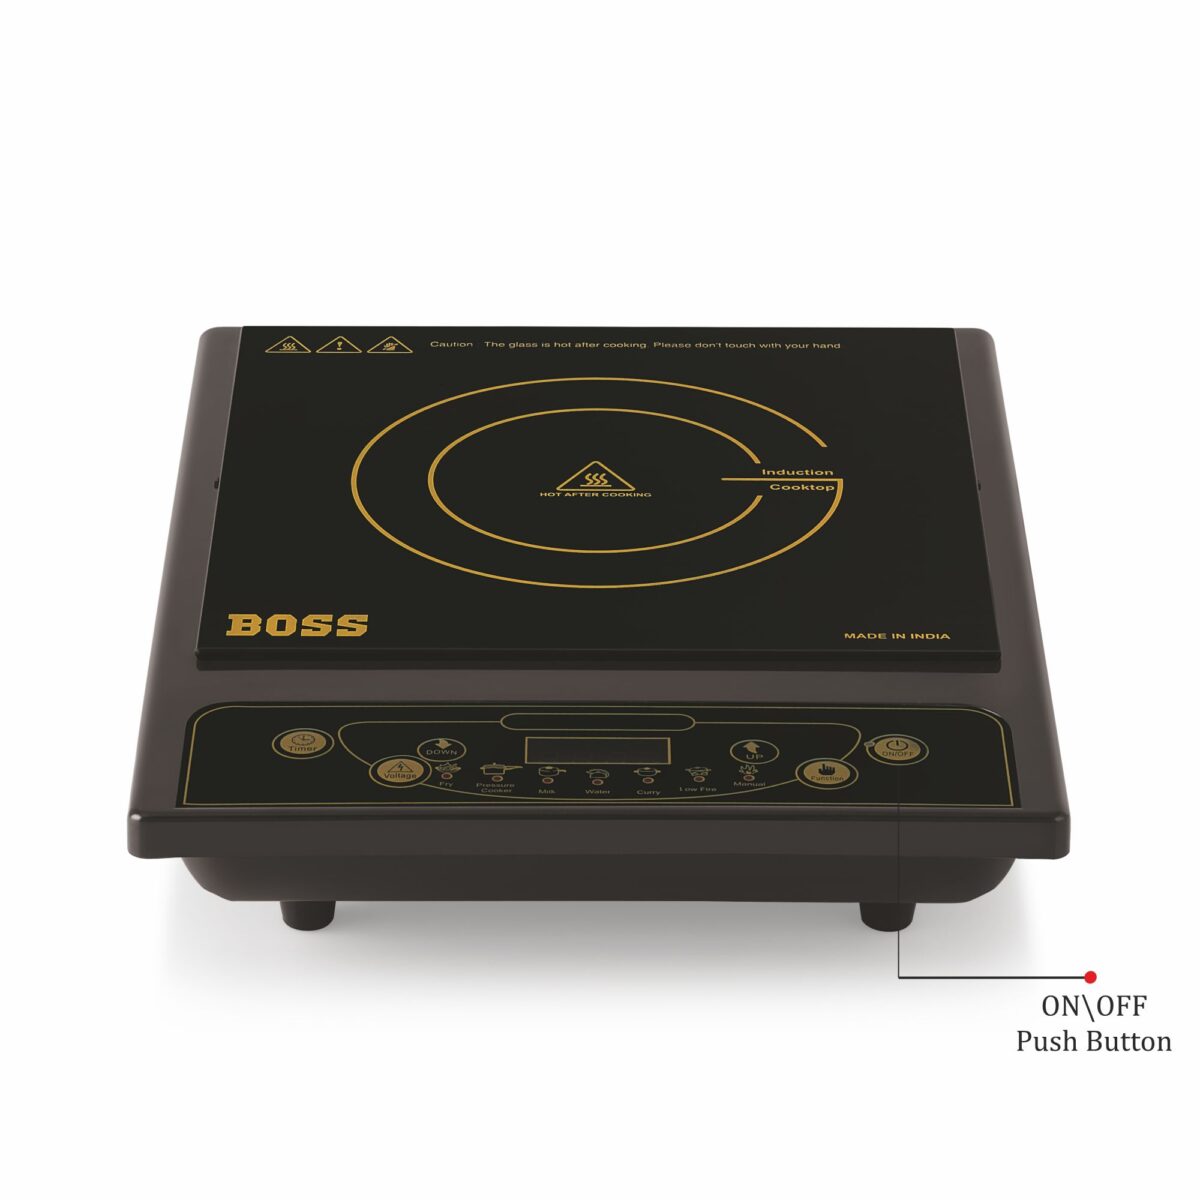 BOSS Chefmax 1600 Watts Induction Cooktop With Preset Menu Options